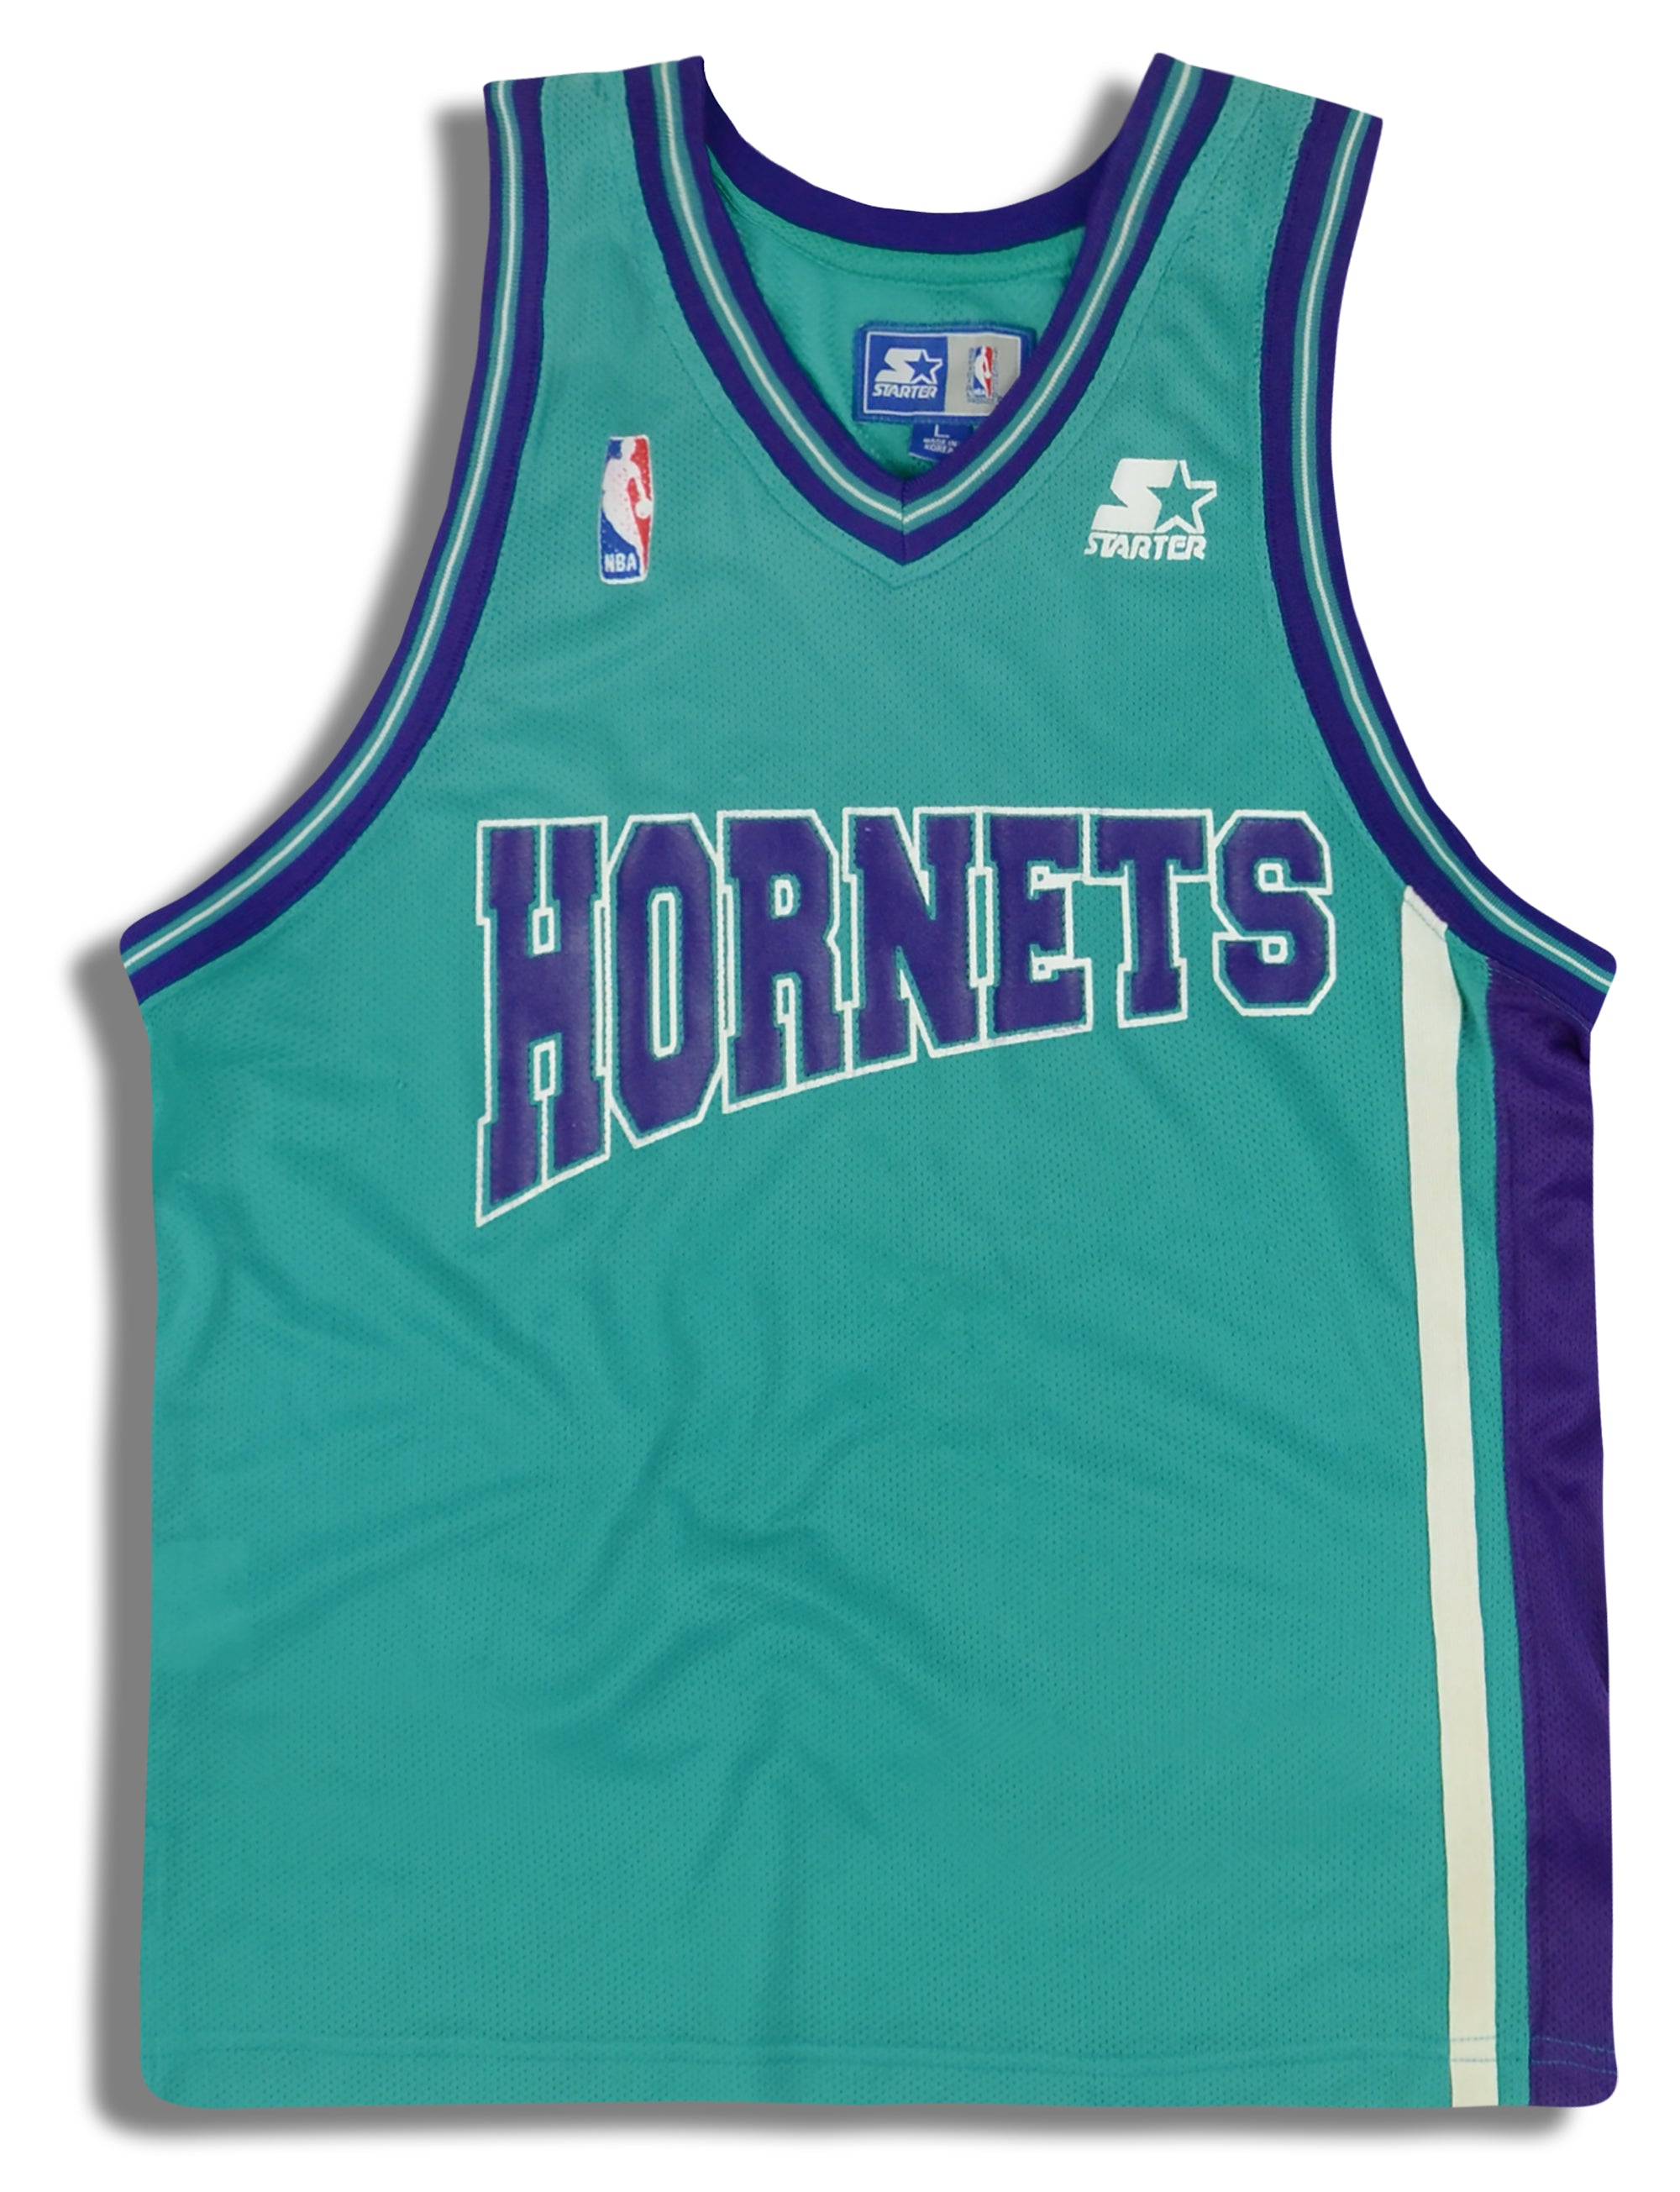 1990's CHARLOTTE HORNETS STARTER JERSEY L - Classic American Sports